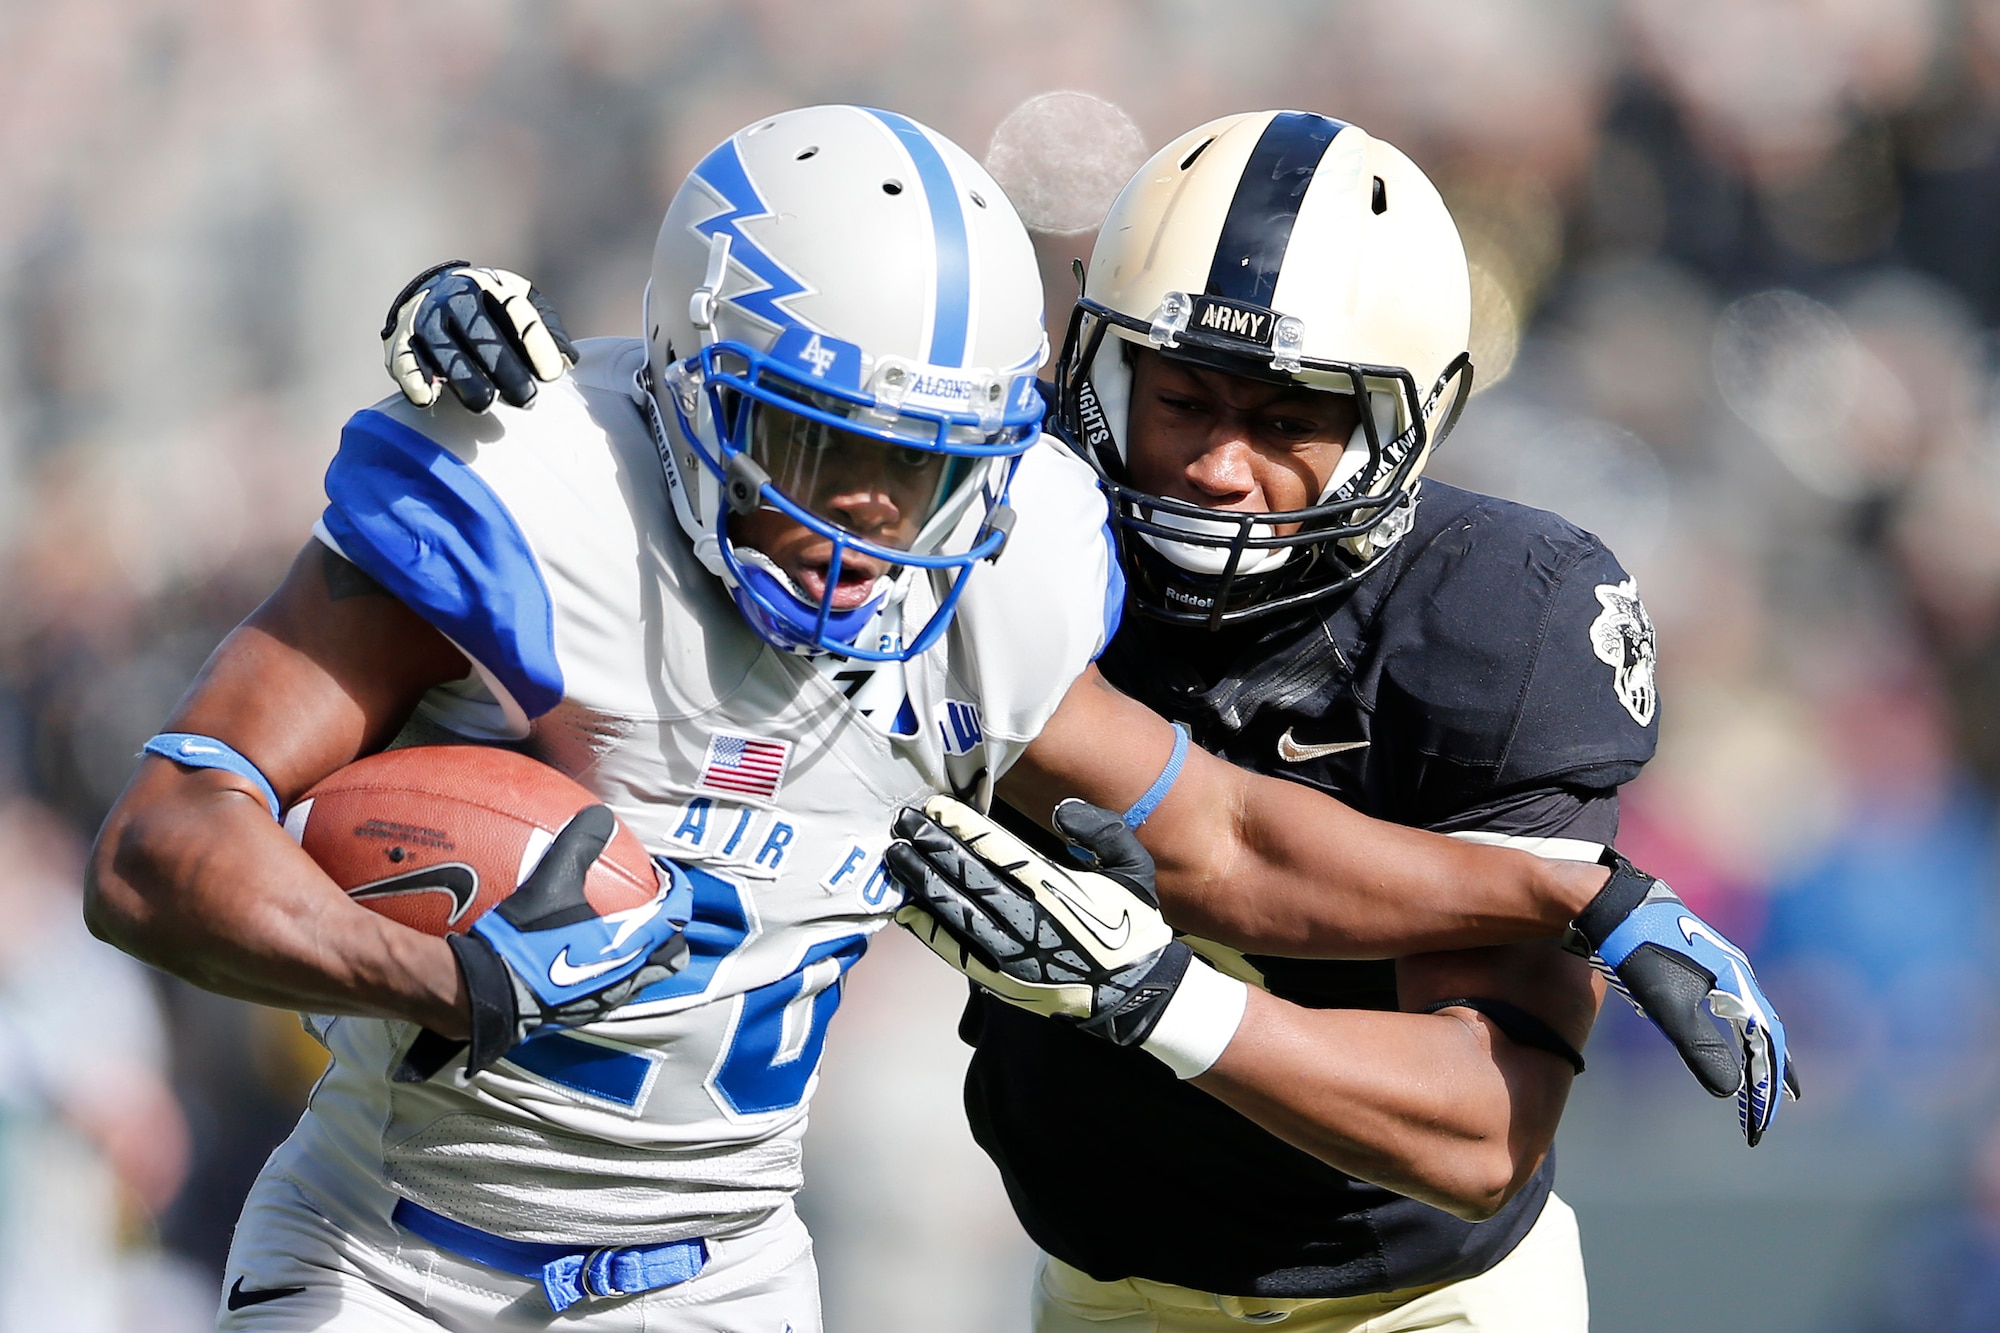 Air Force wide receiver Dontae Strickland tries to break away from Army defensive back Chris Carnegie after catching a pass during the NCAA Football game between Falcons and Black Knights at Michie Stadium in West Point, N.Y., Nov. 3. Army defeated Air Force 41-21, earning their first victory over Air Force since 2005. (U.S. Army photo/Tommy Gilligan)